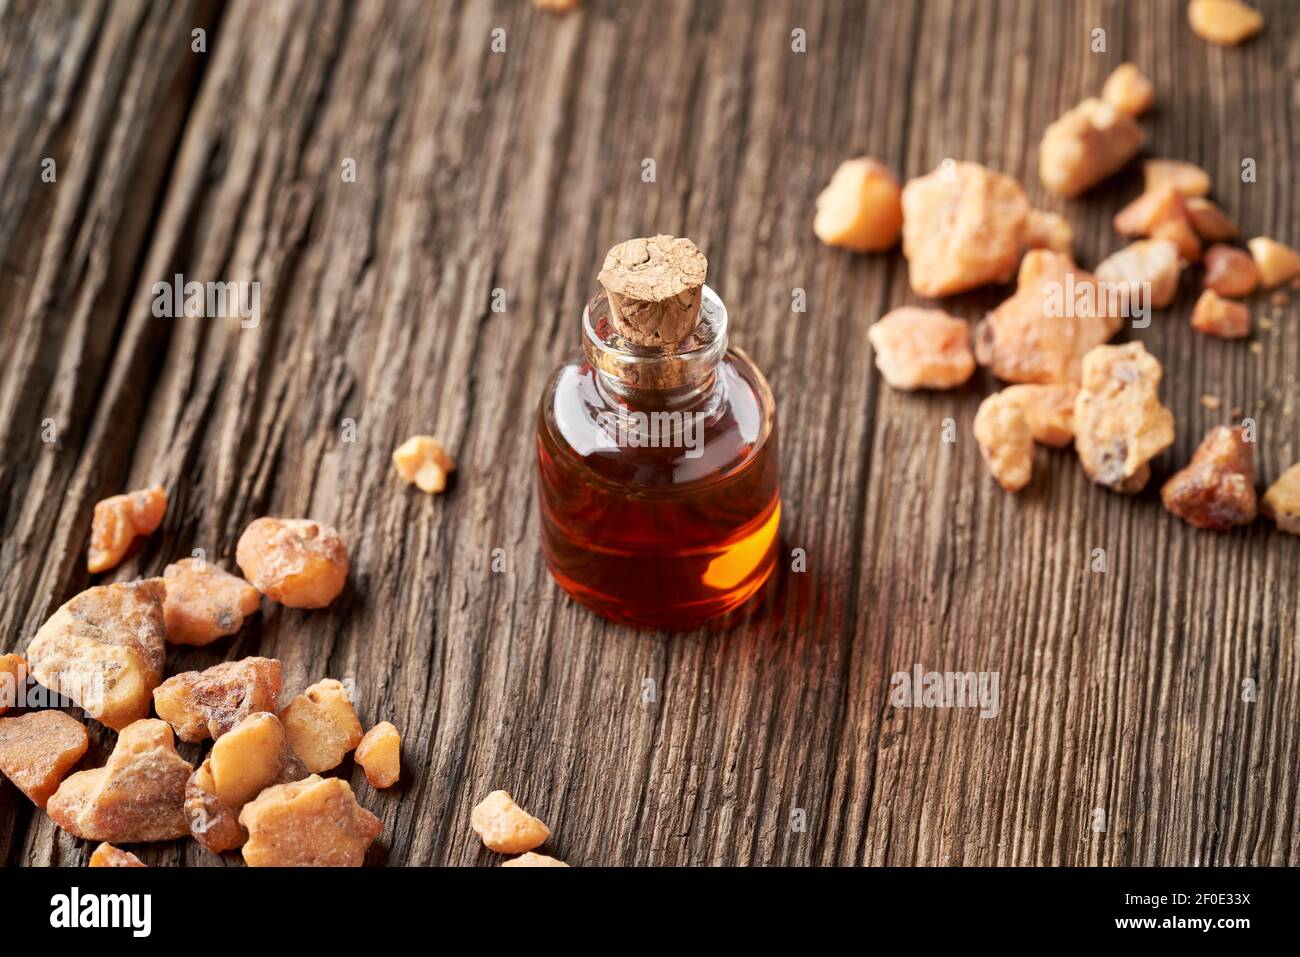 Styrax benzoin essential oil in a bottle Stock Photo